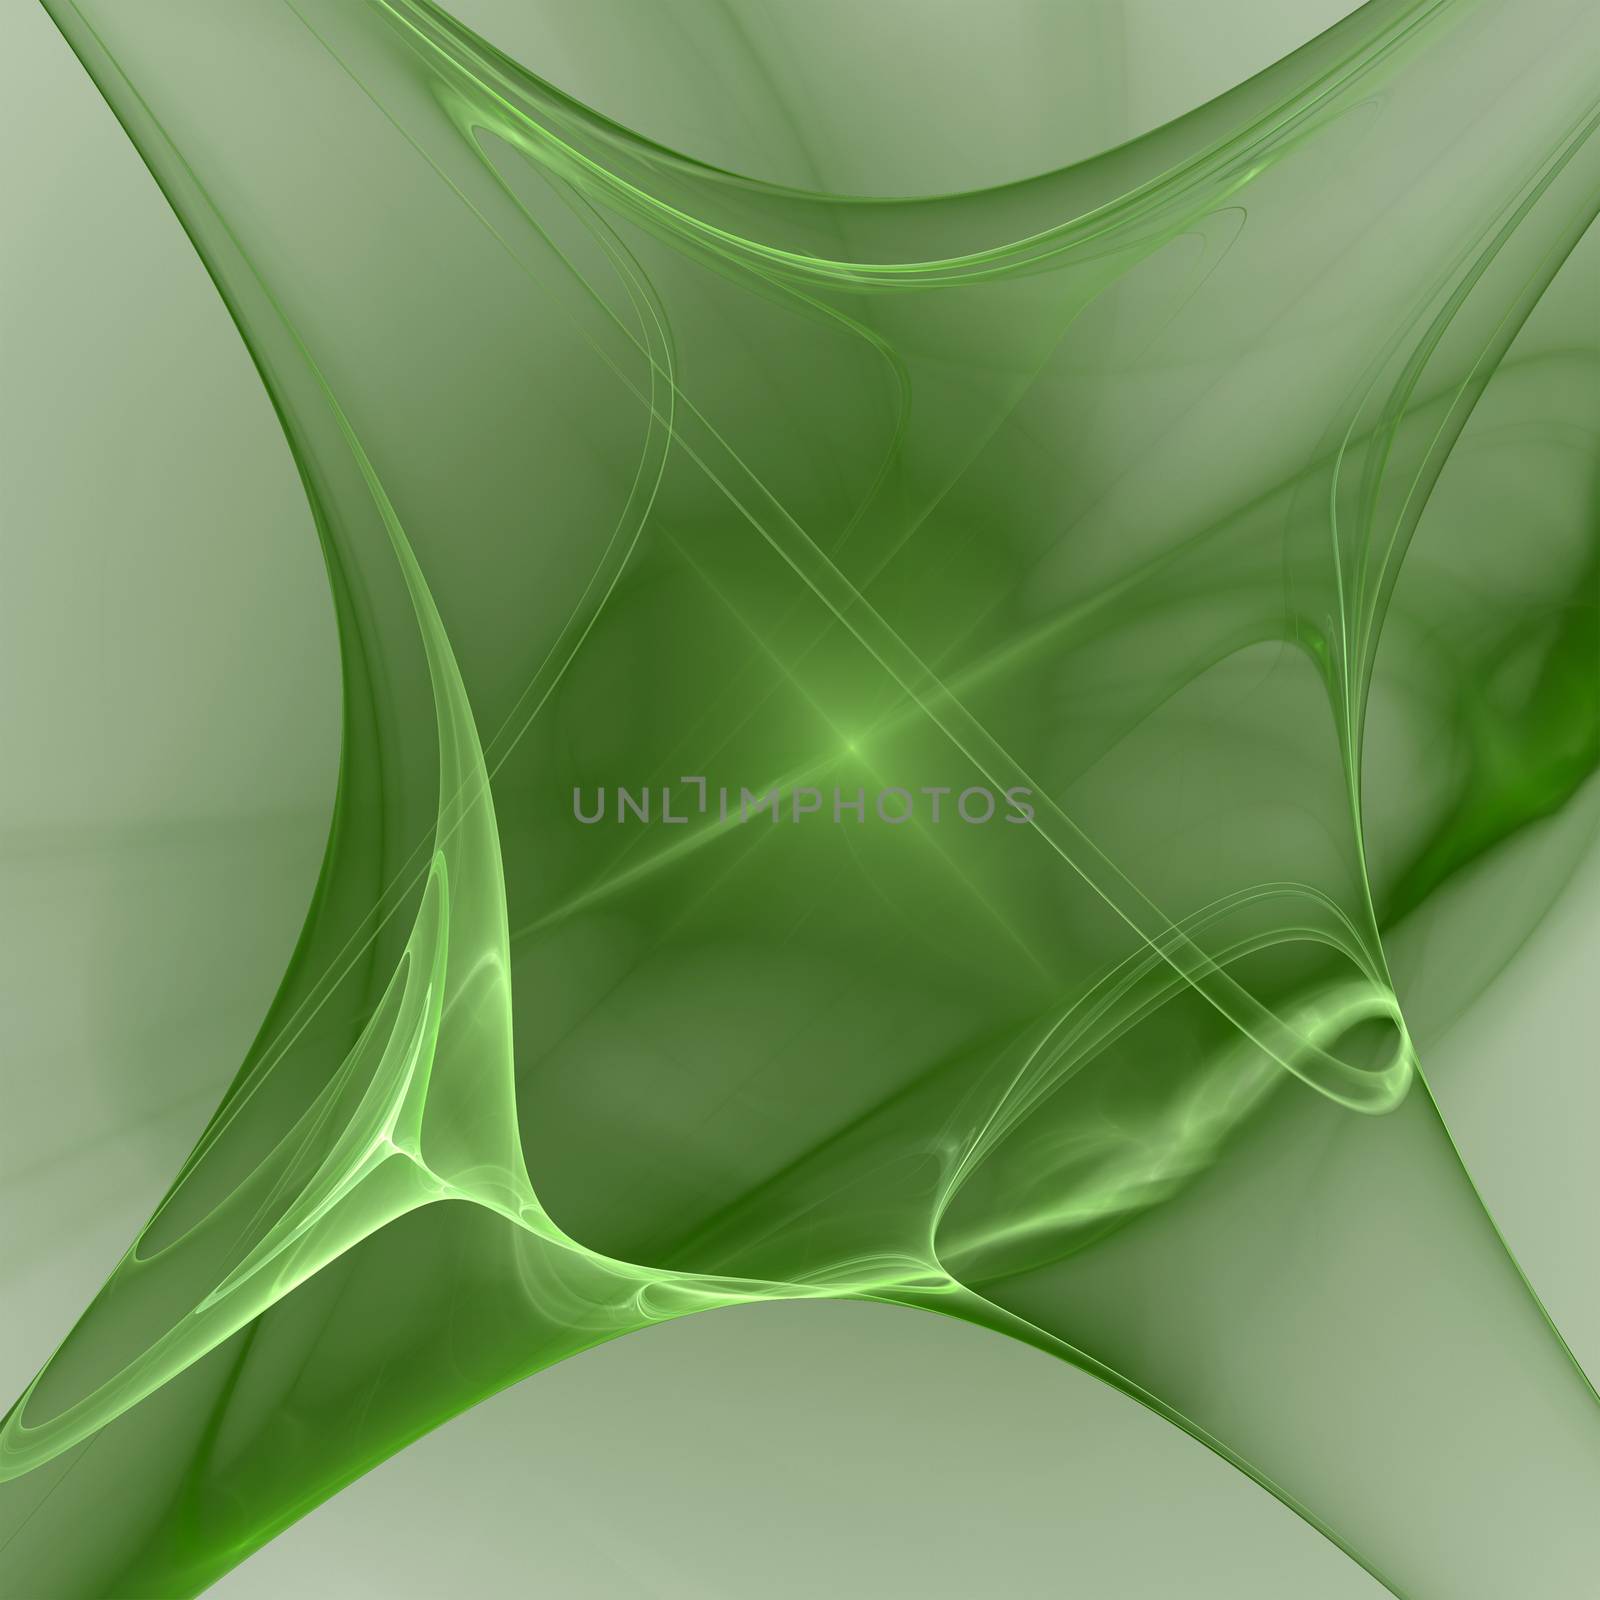 Fractal with green colors on light background